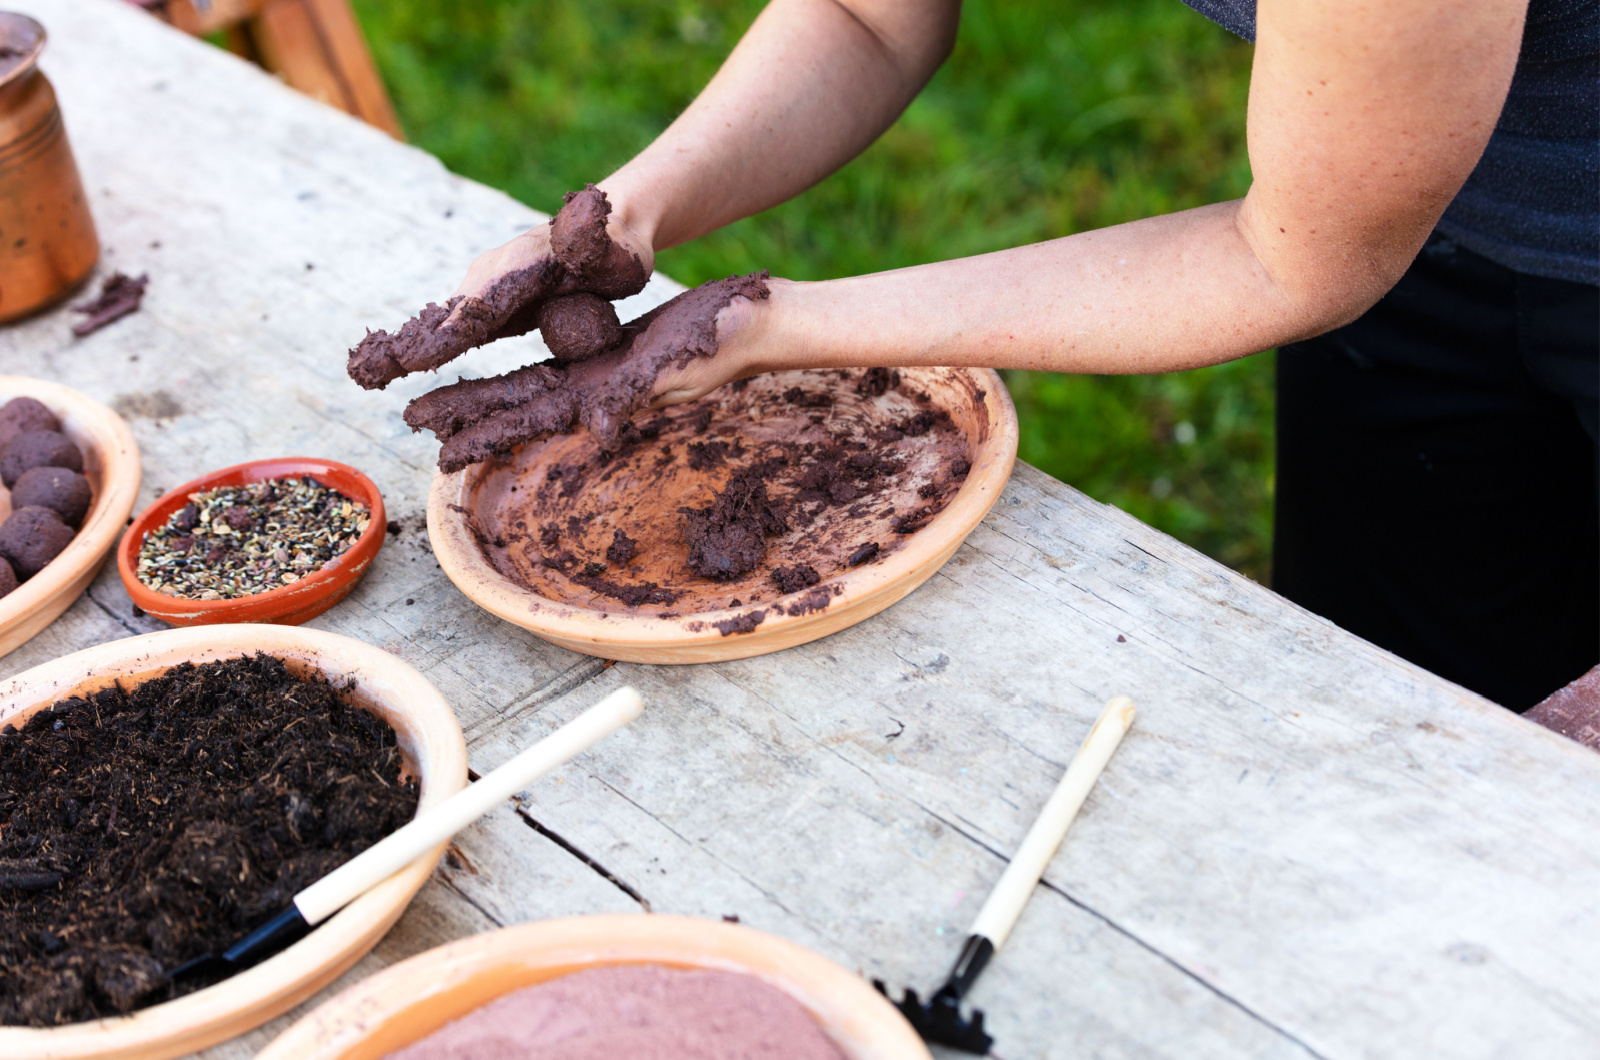 woman is making seed bombs on a wooden table